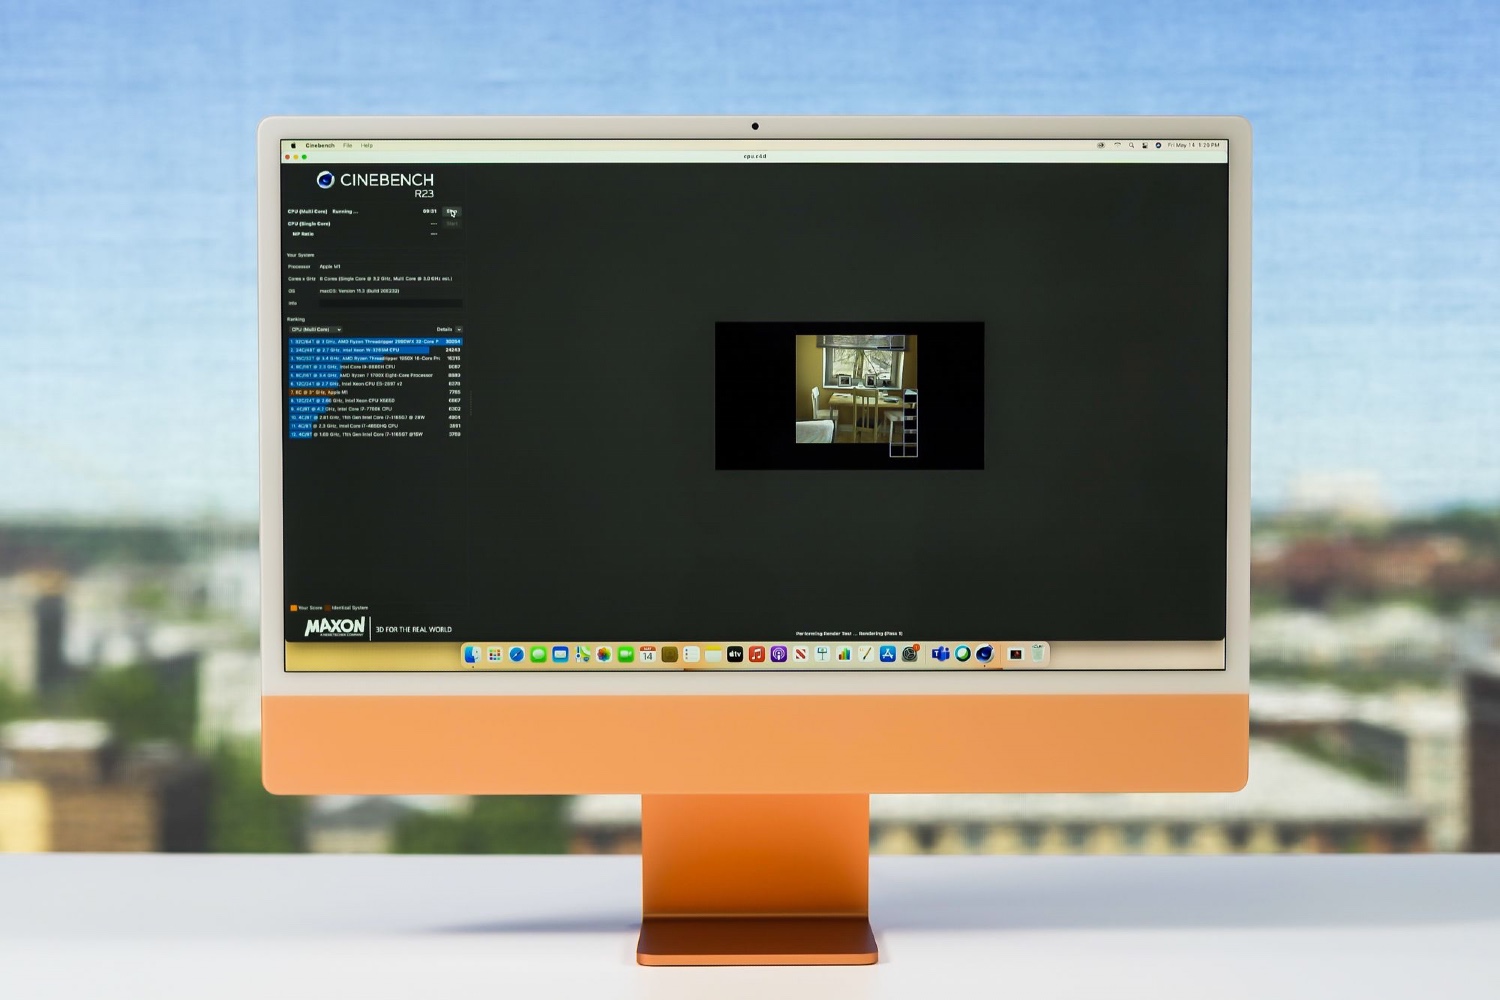 Apple iMac 24-inch (M1) Review: Seeing Is Believing